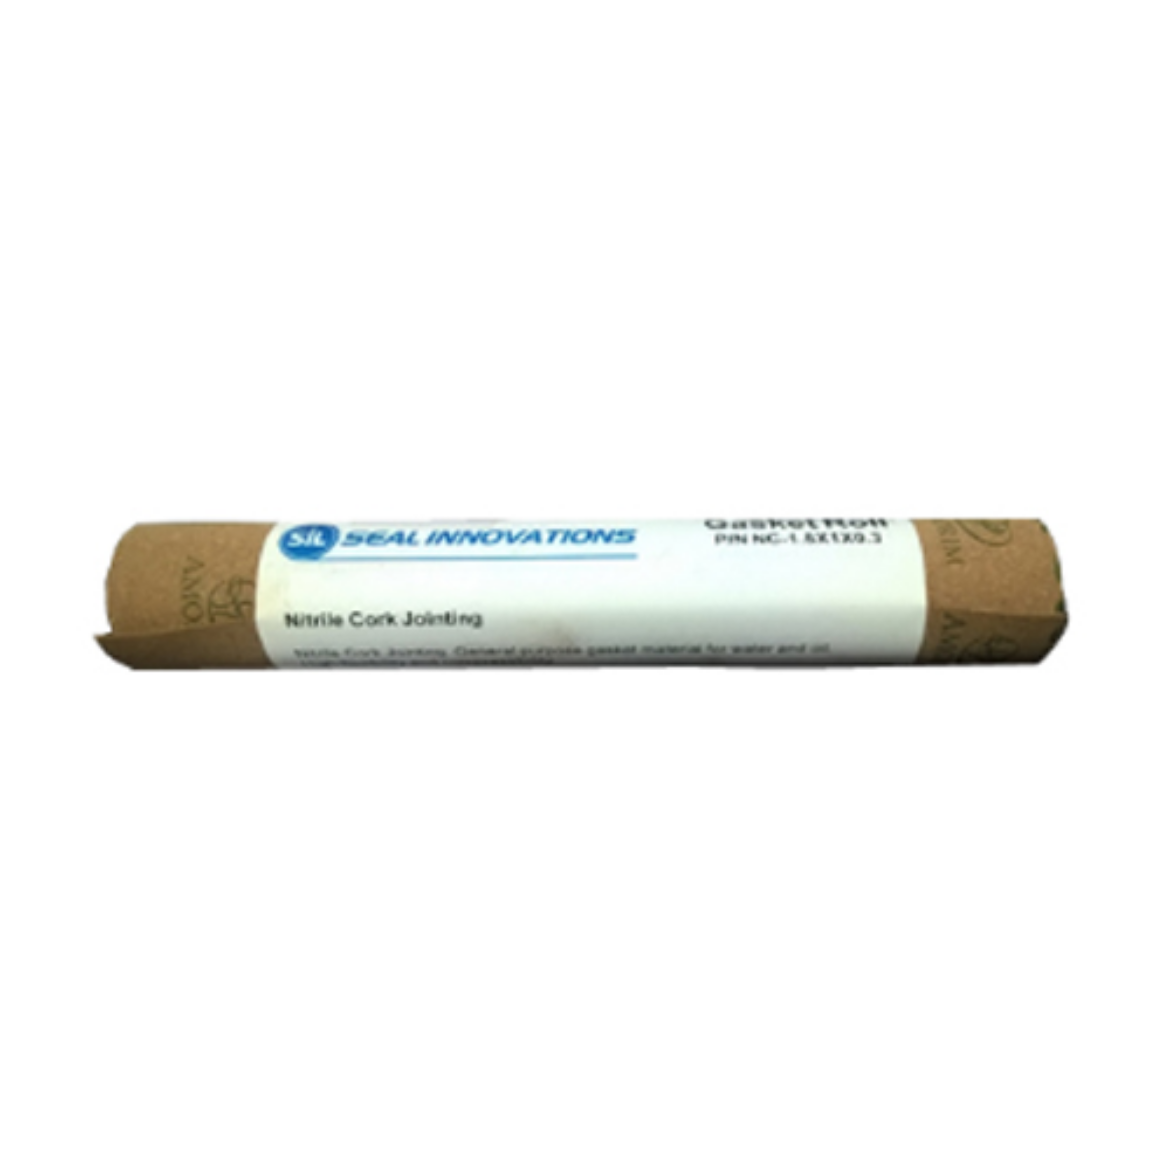 Picture of GASKET PAPER Oil Jointing 1m x 1m x 0.8mm Thick